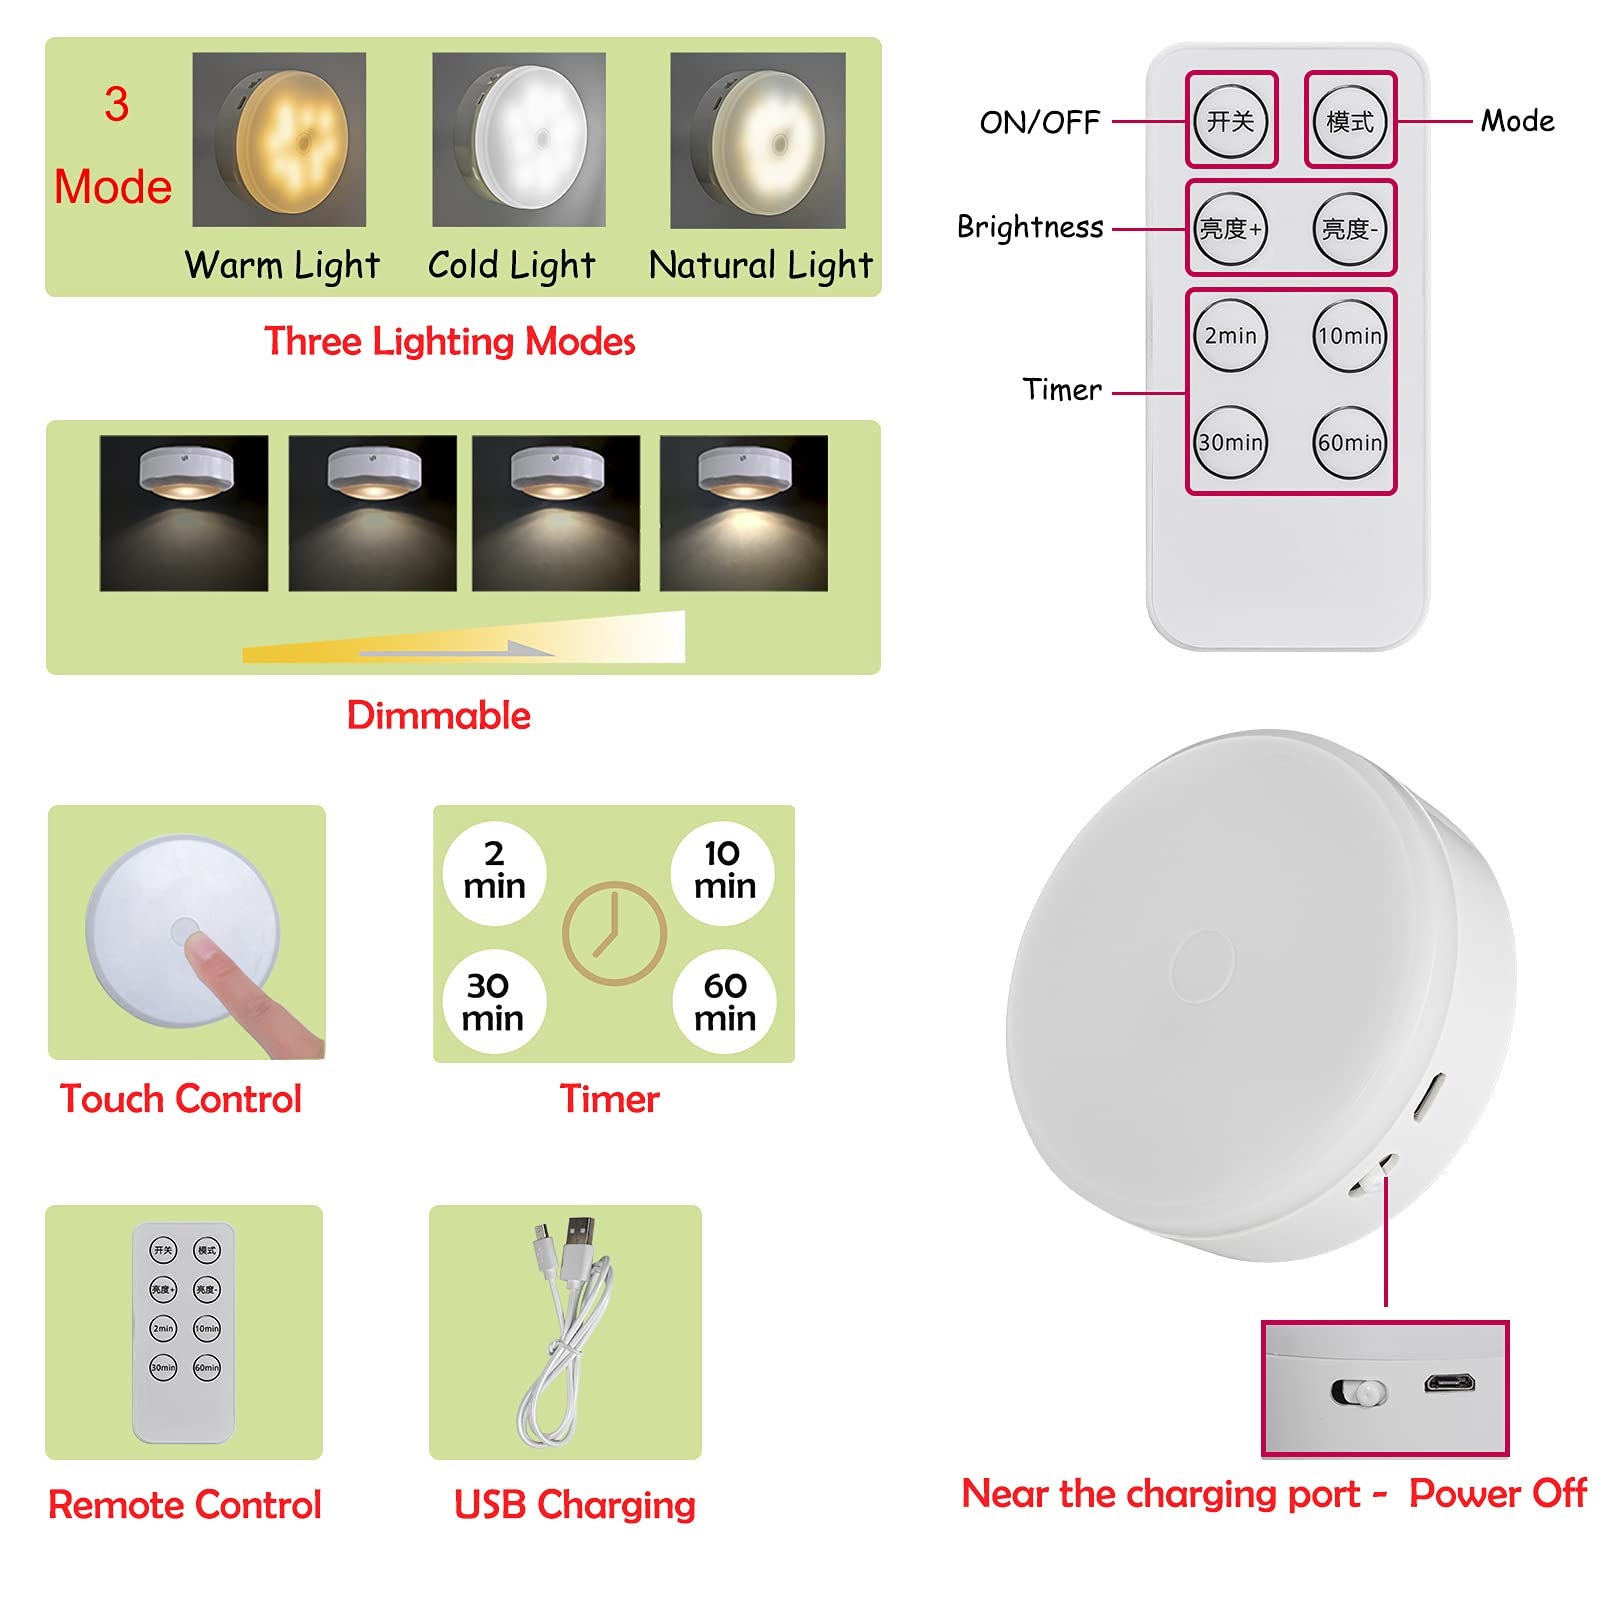 FSLiving Wireless USB Charging Battery Run Dimmable Remote Control Low-Voltage 5V LED Pendant Lighting Vintage Design Pink Metal Light Fixture for Laundry Dorm Bedroom Easy to Install-1 Light - image 2 of 6